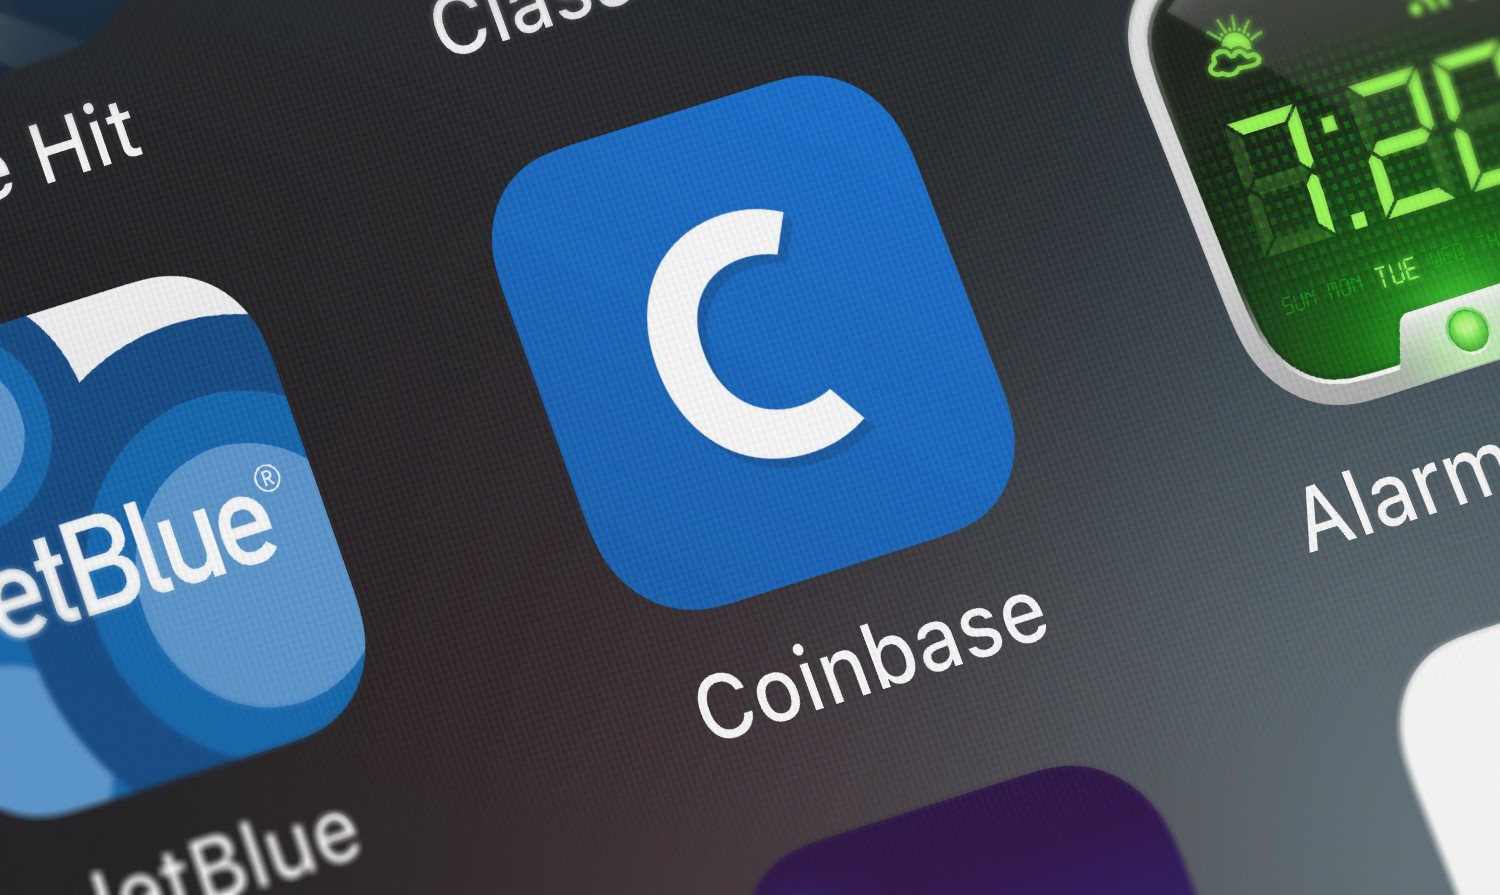 Coinbase reported that it fixed the problem that halted transactions with US banks